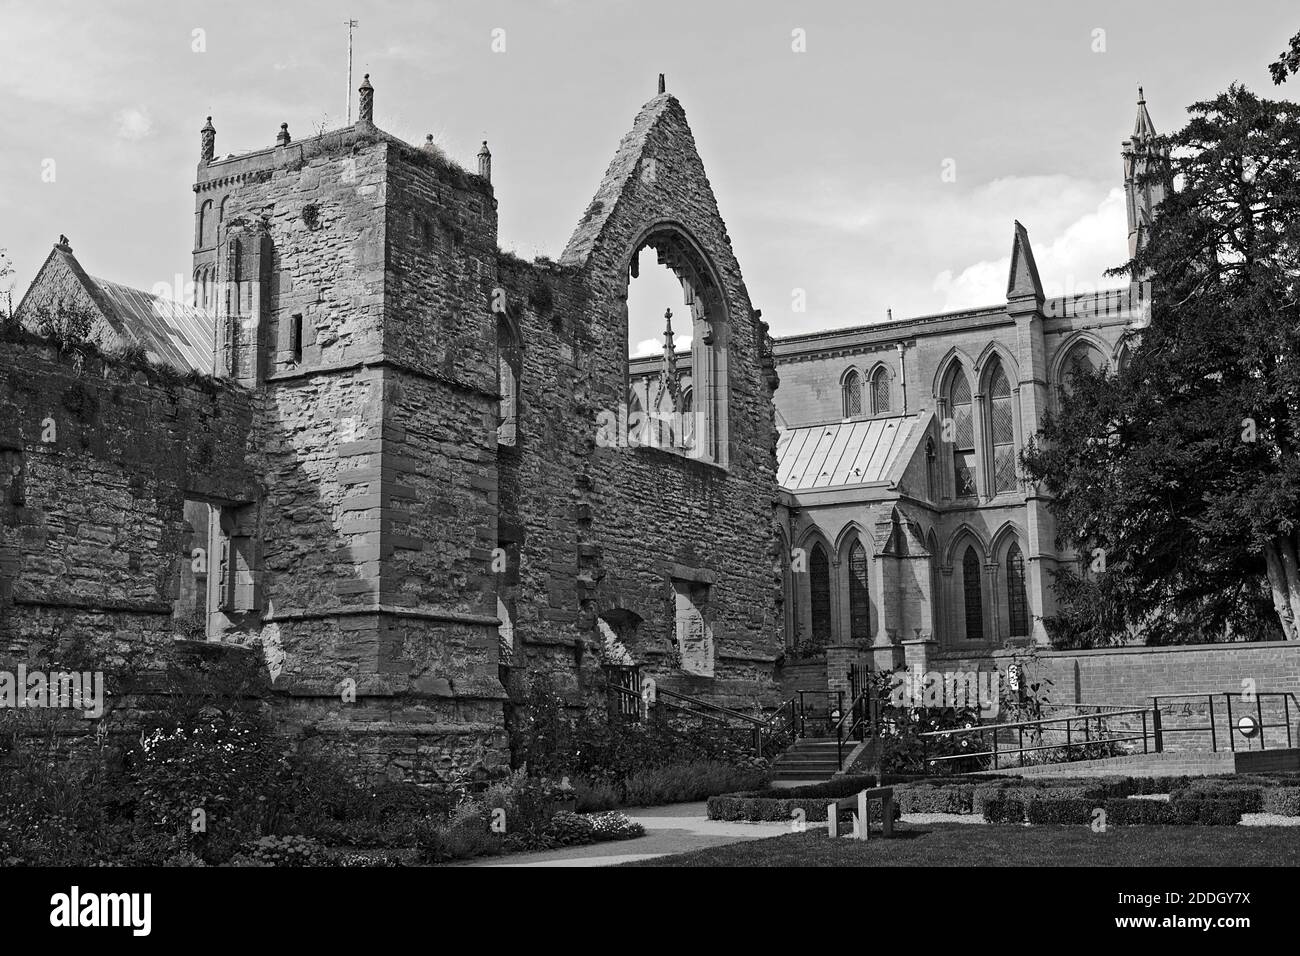 Part of the ruins of the Archbishops of York's Southwell Palace in the grounds of Southwell Minster, Nottinghamshire Stock Photo